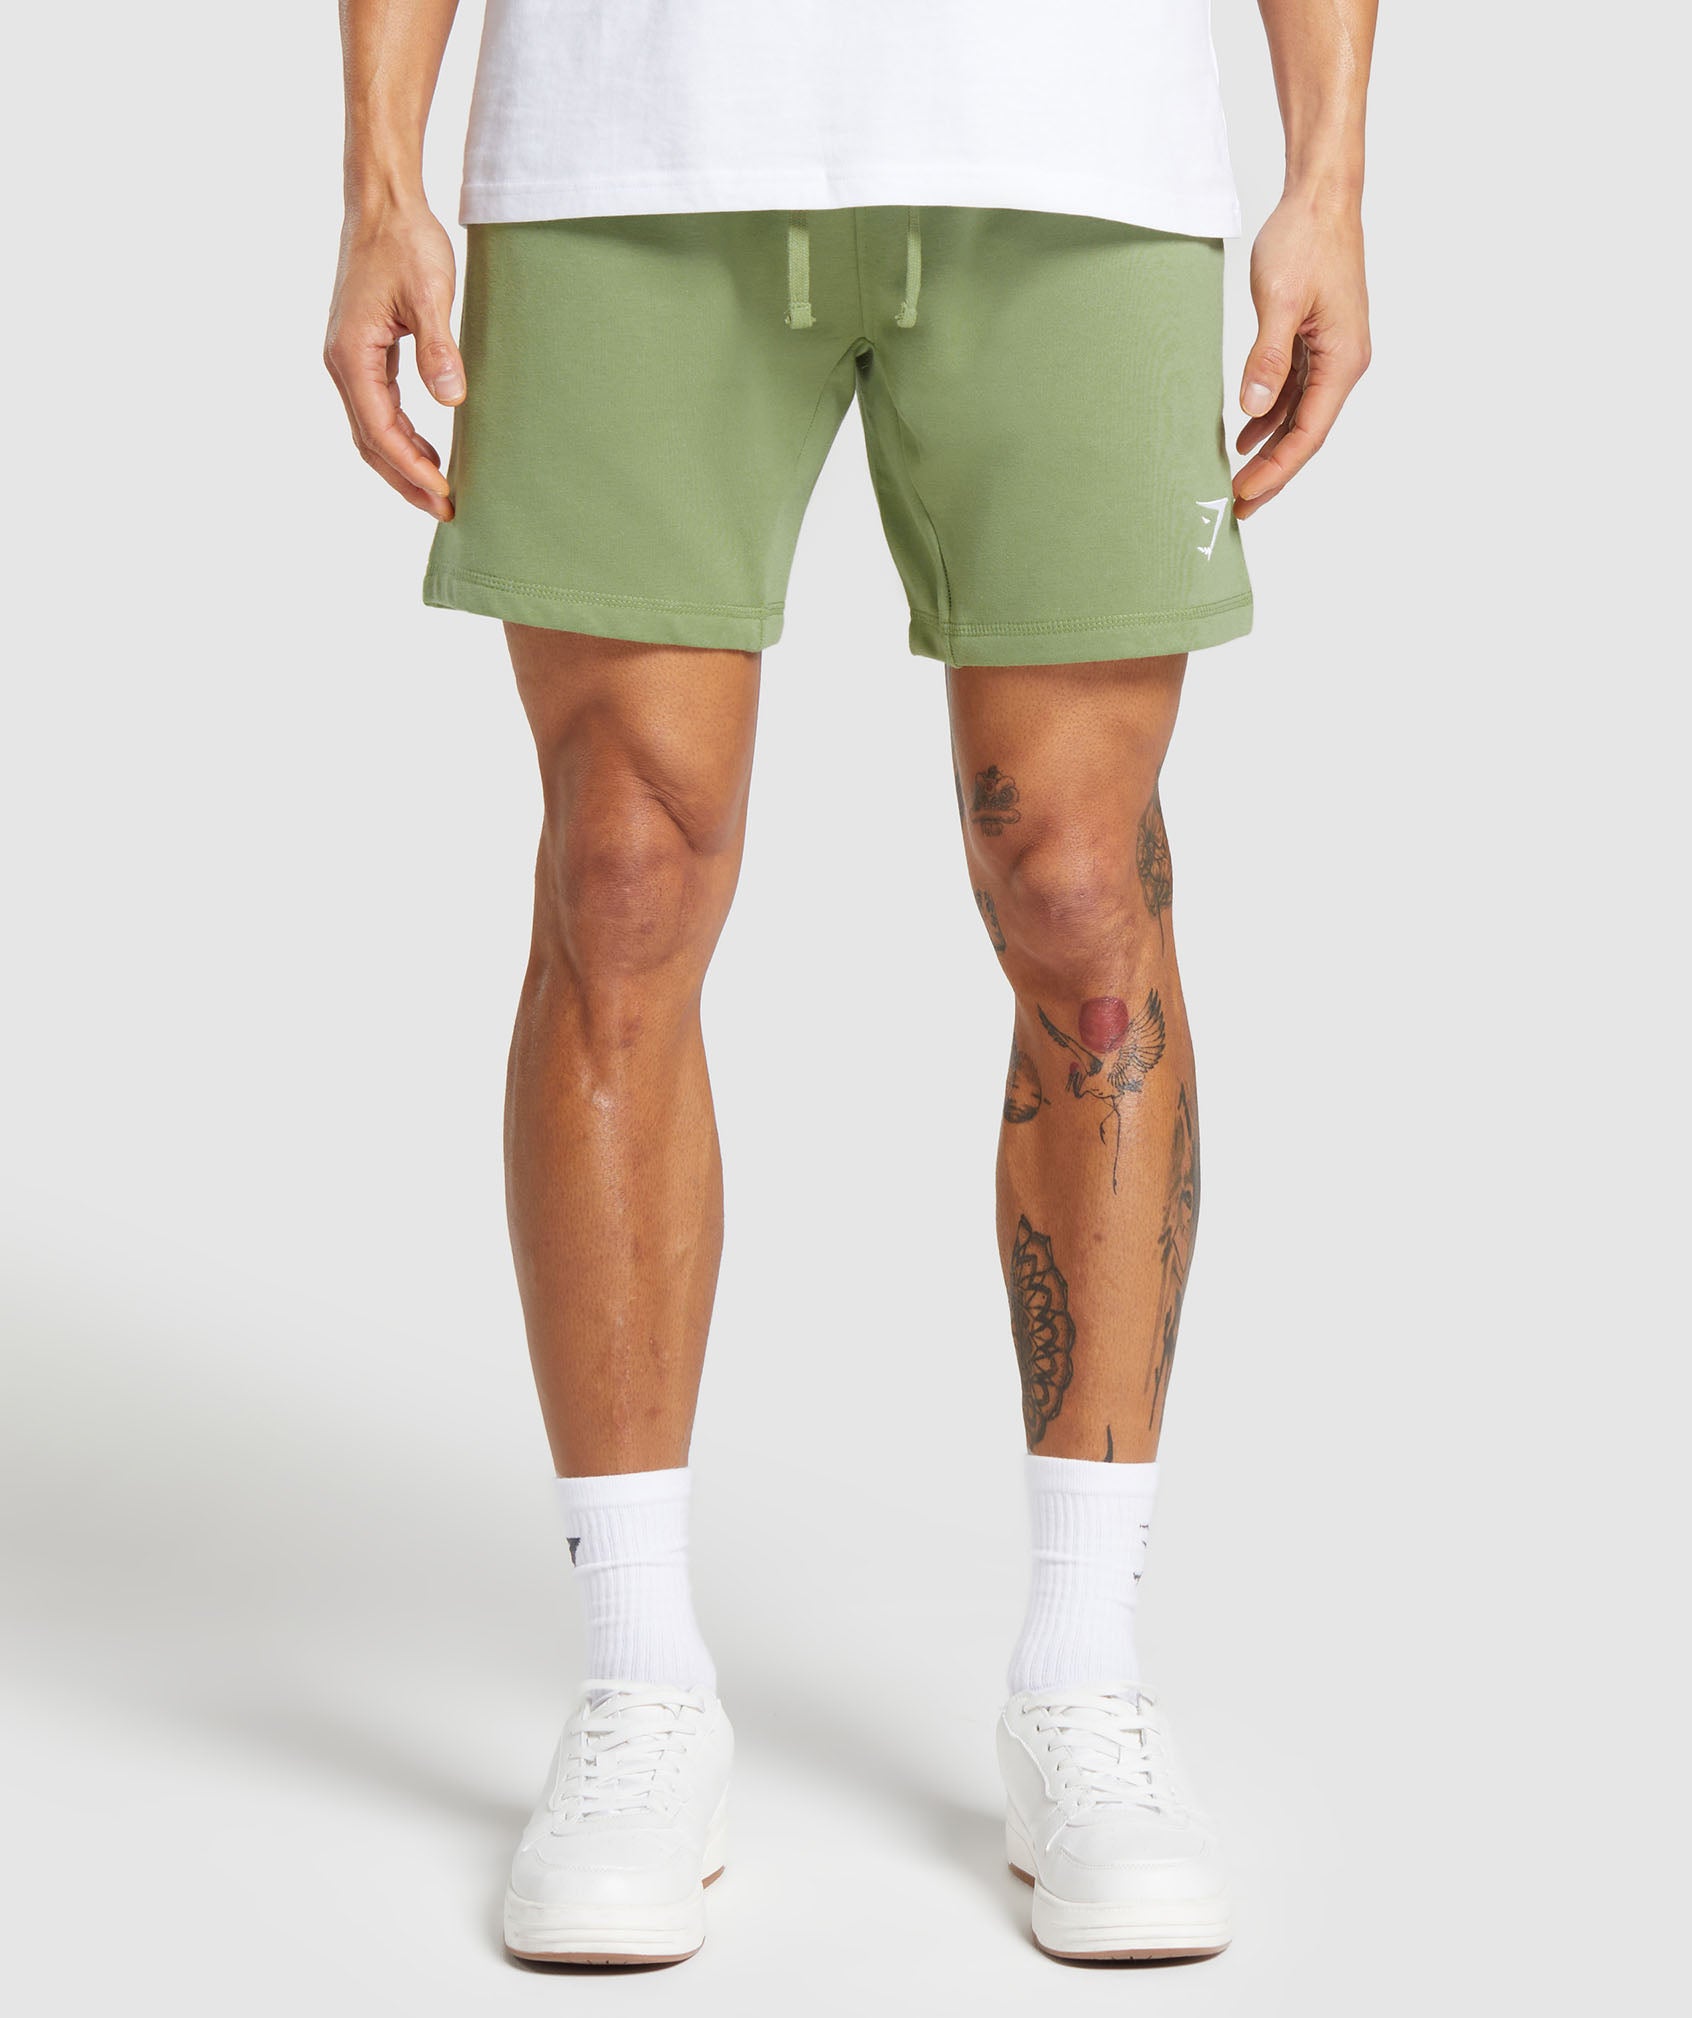 Crest 7" Shorts in Natural Sage Green - view 1